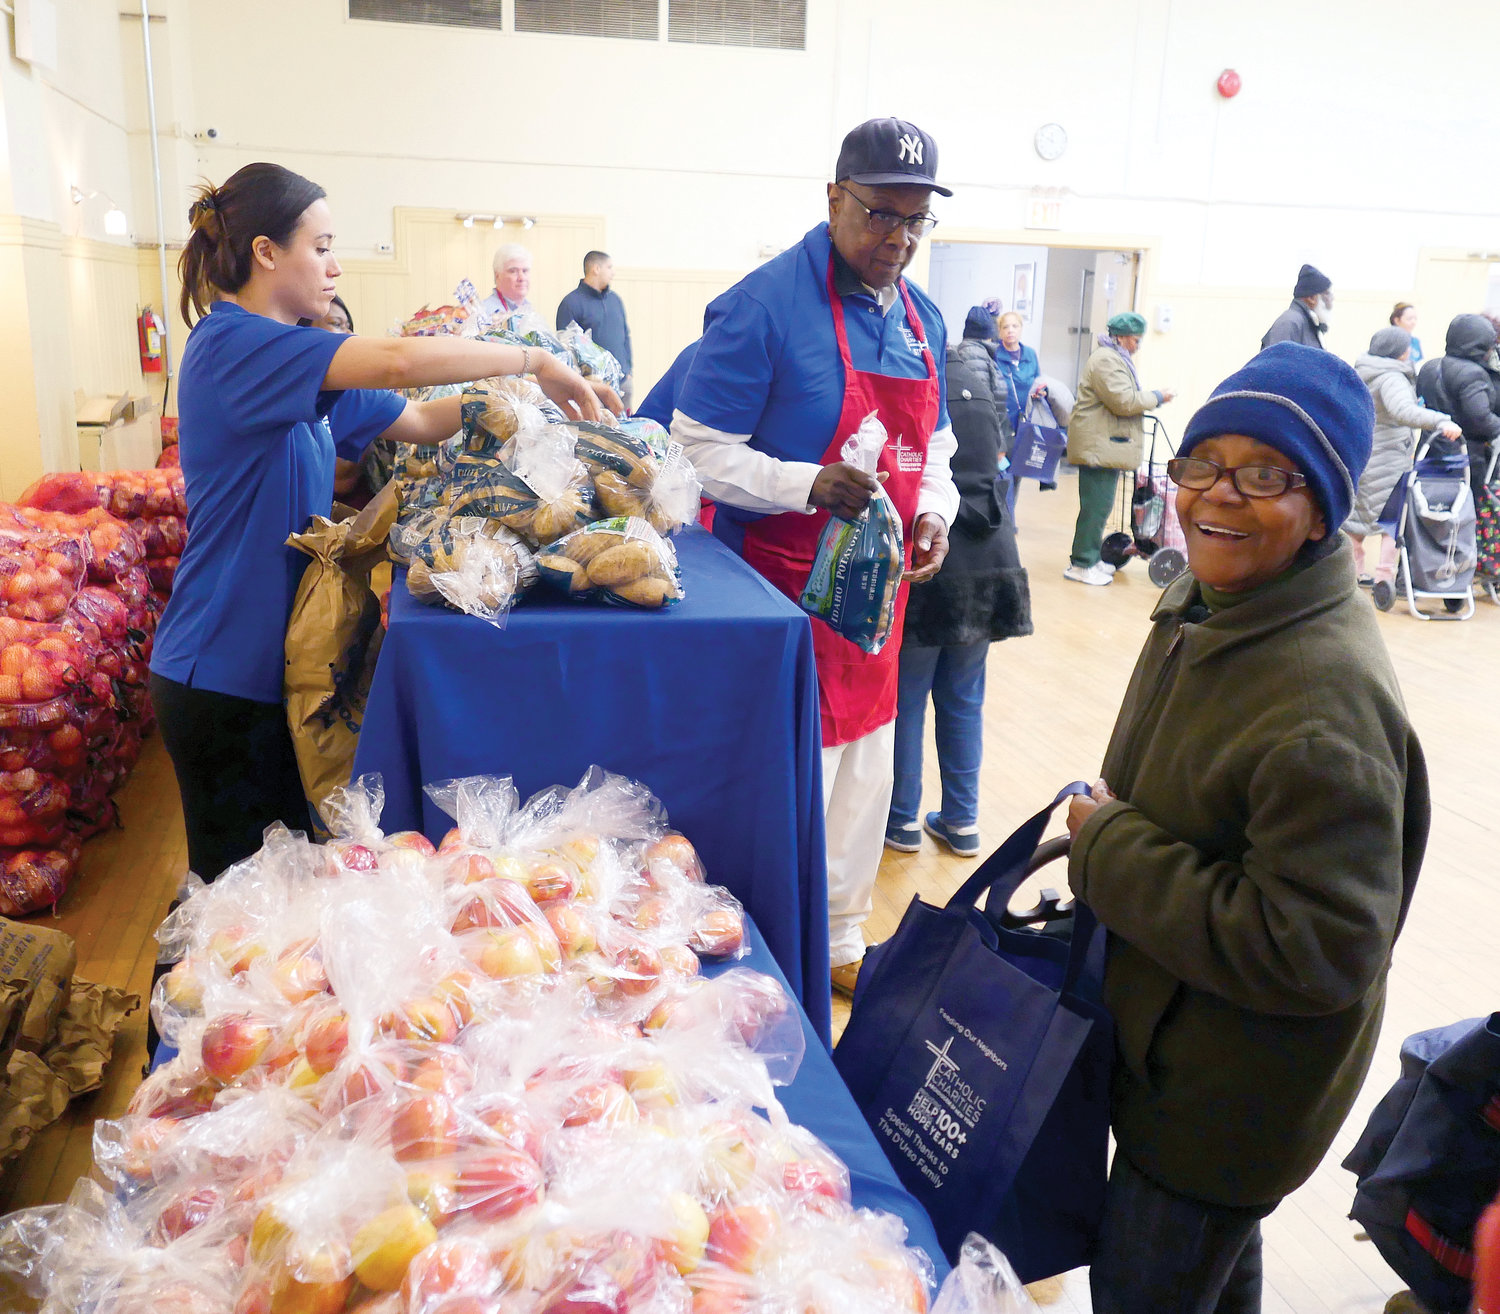 Volunteers and recipients are shown at the community center, located on West 134th Street.